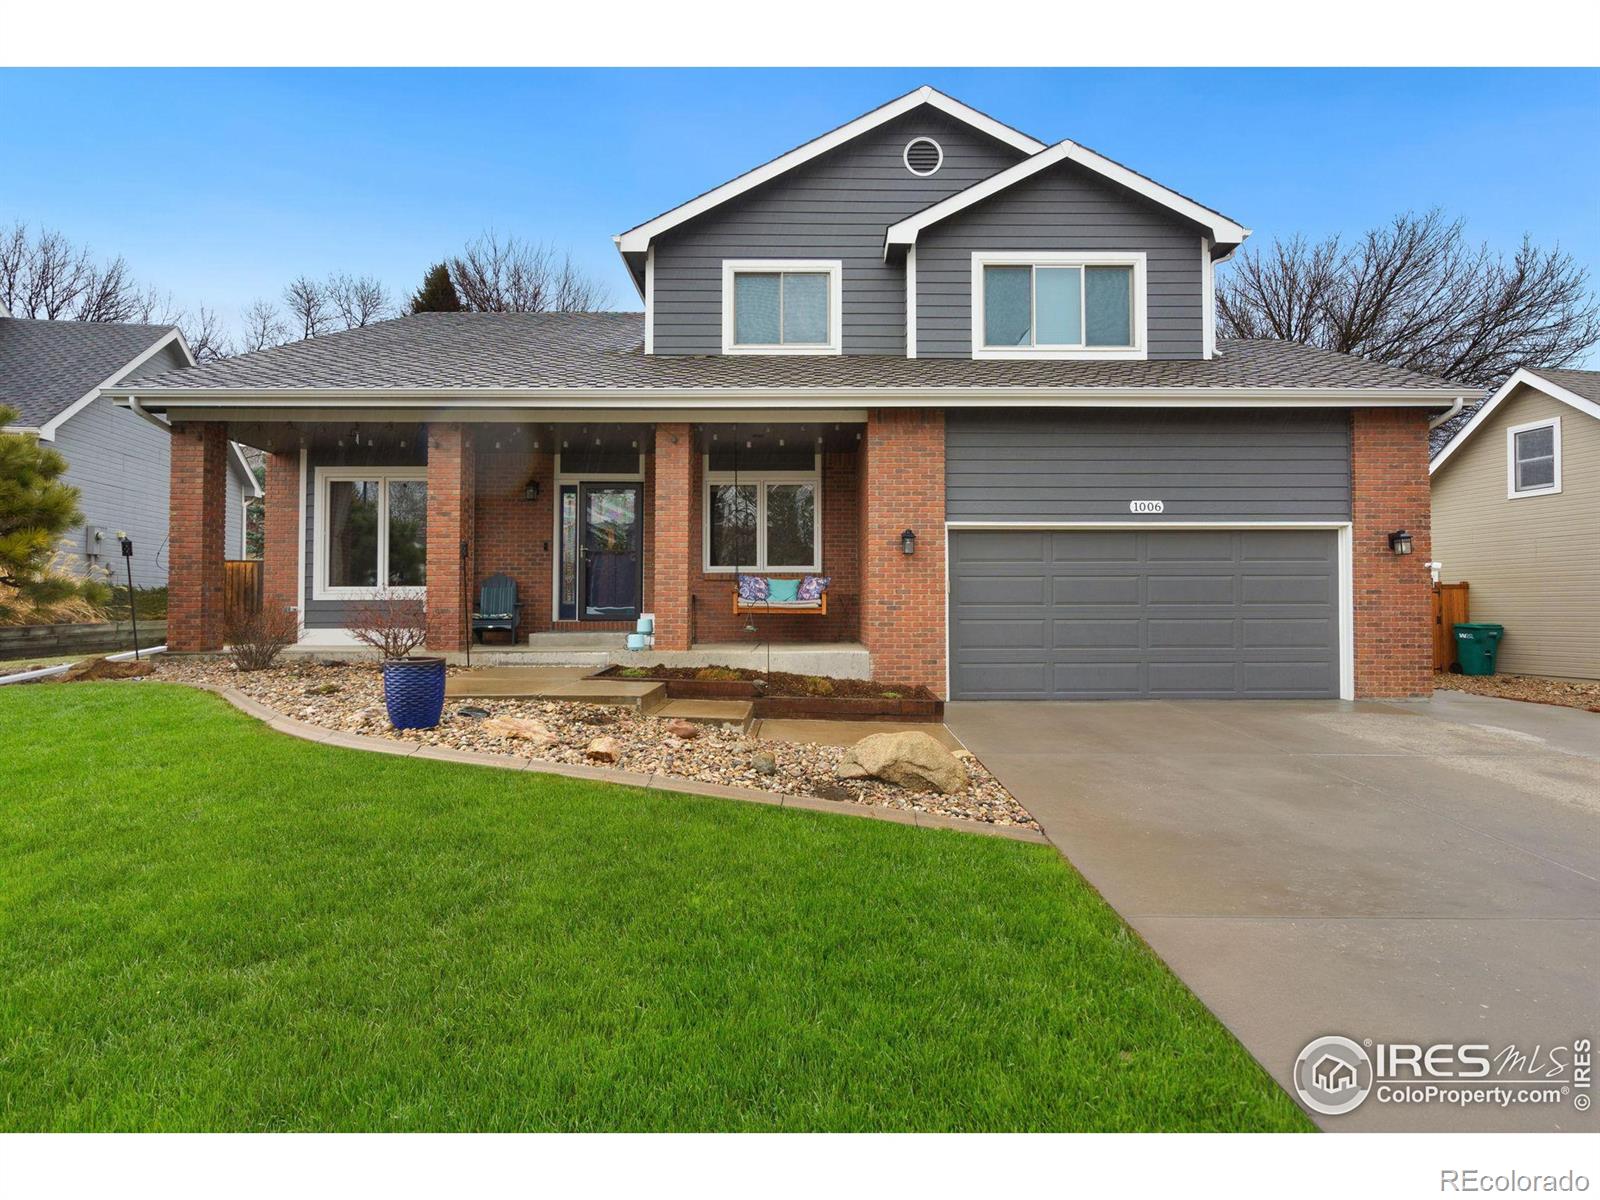 1006  Hinsdale Drive, fort collins MLS: 4567891005227 Beds: 3 Baths: 3 Price: $800,000